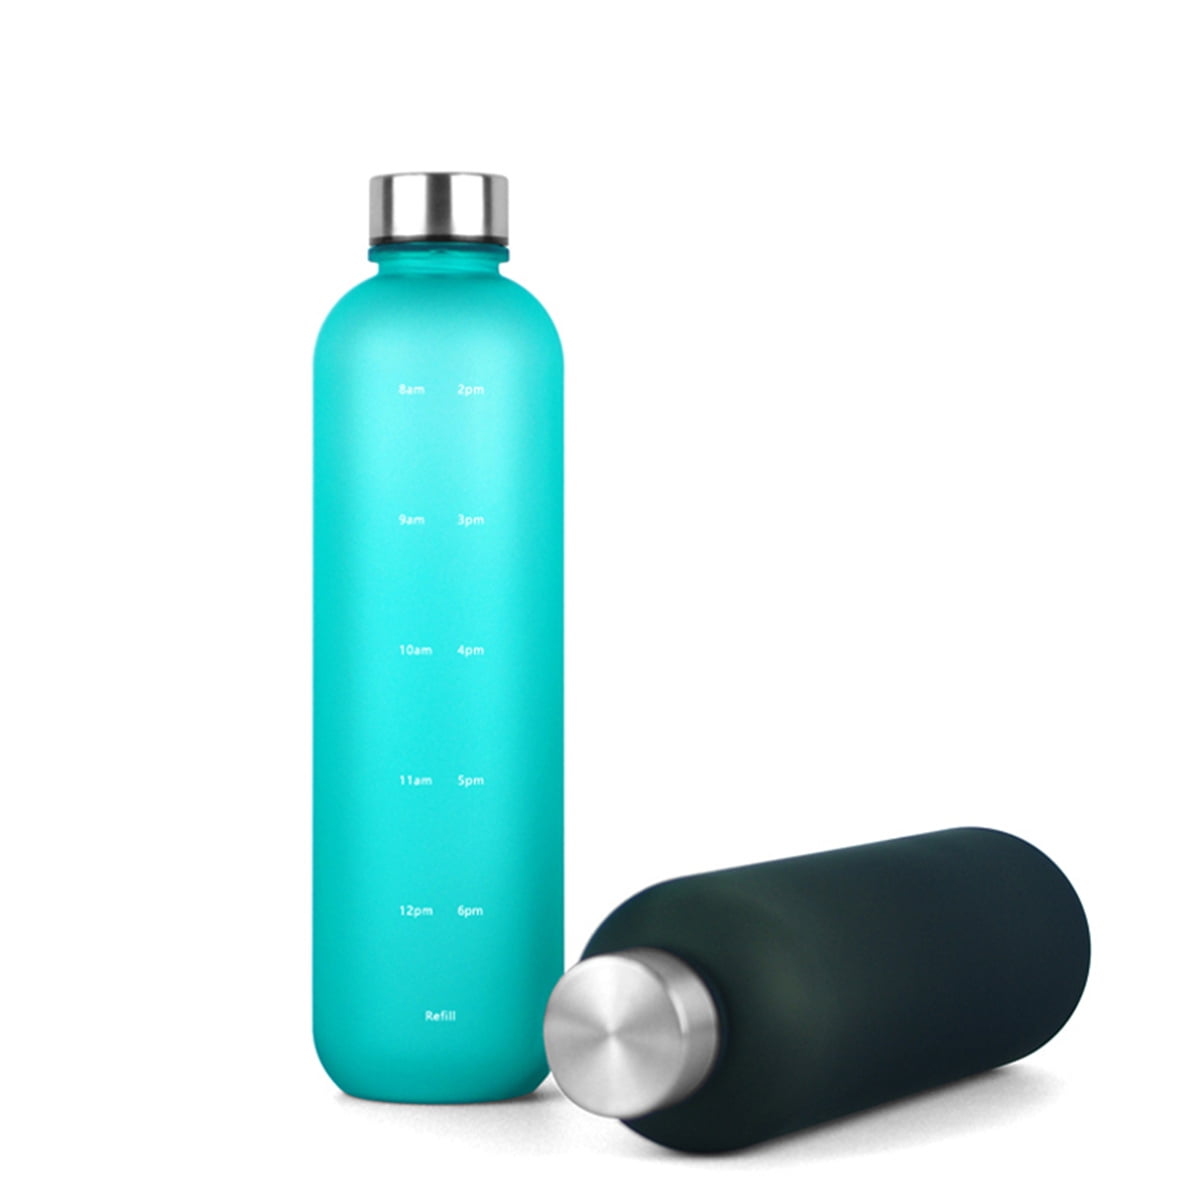 SDJMa Time Marked Cute Water Bottles For Women And Men, BPA Free